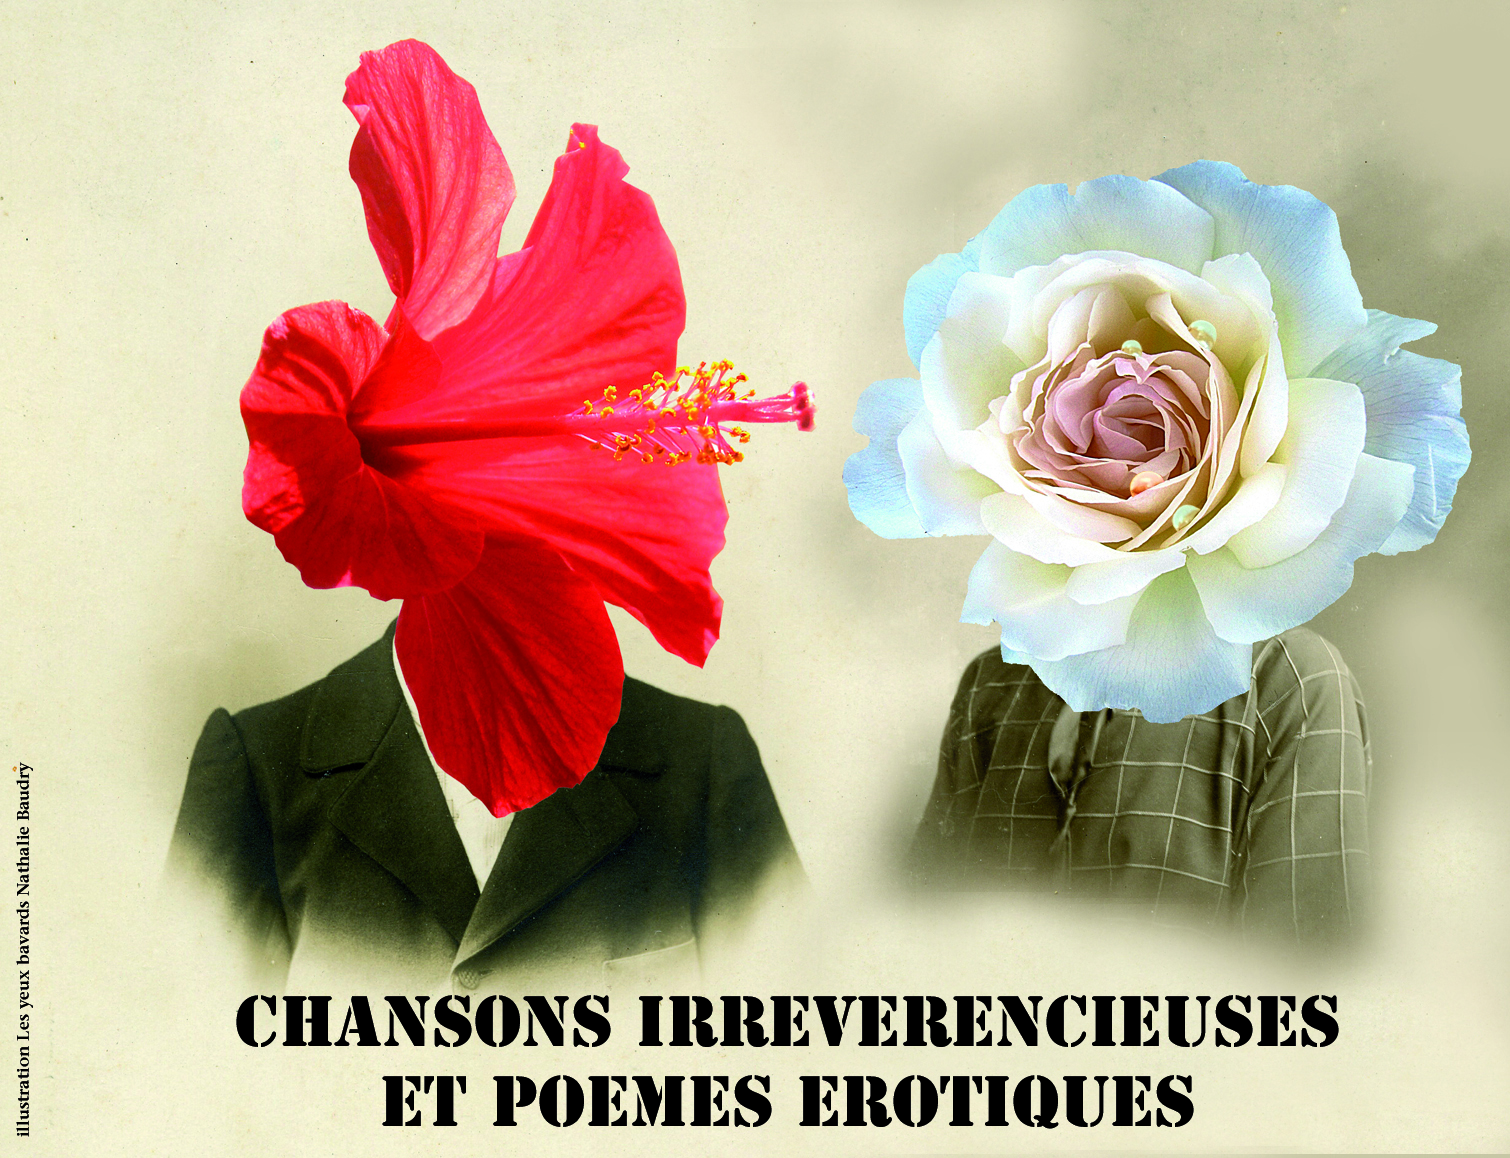 CHANSONS IRREVERENCIEUSES ET POEMES EROTIQUES